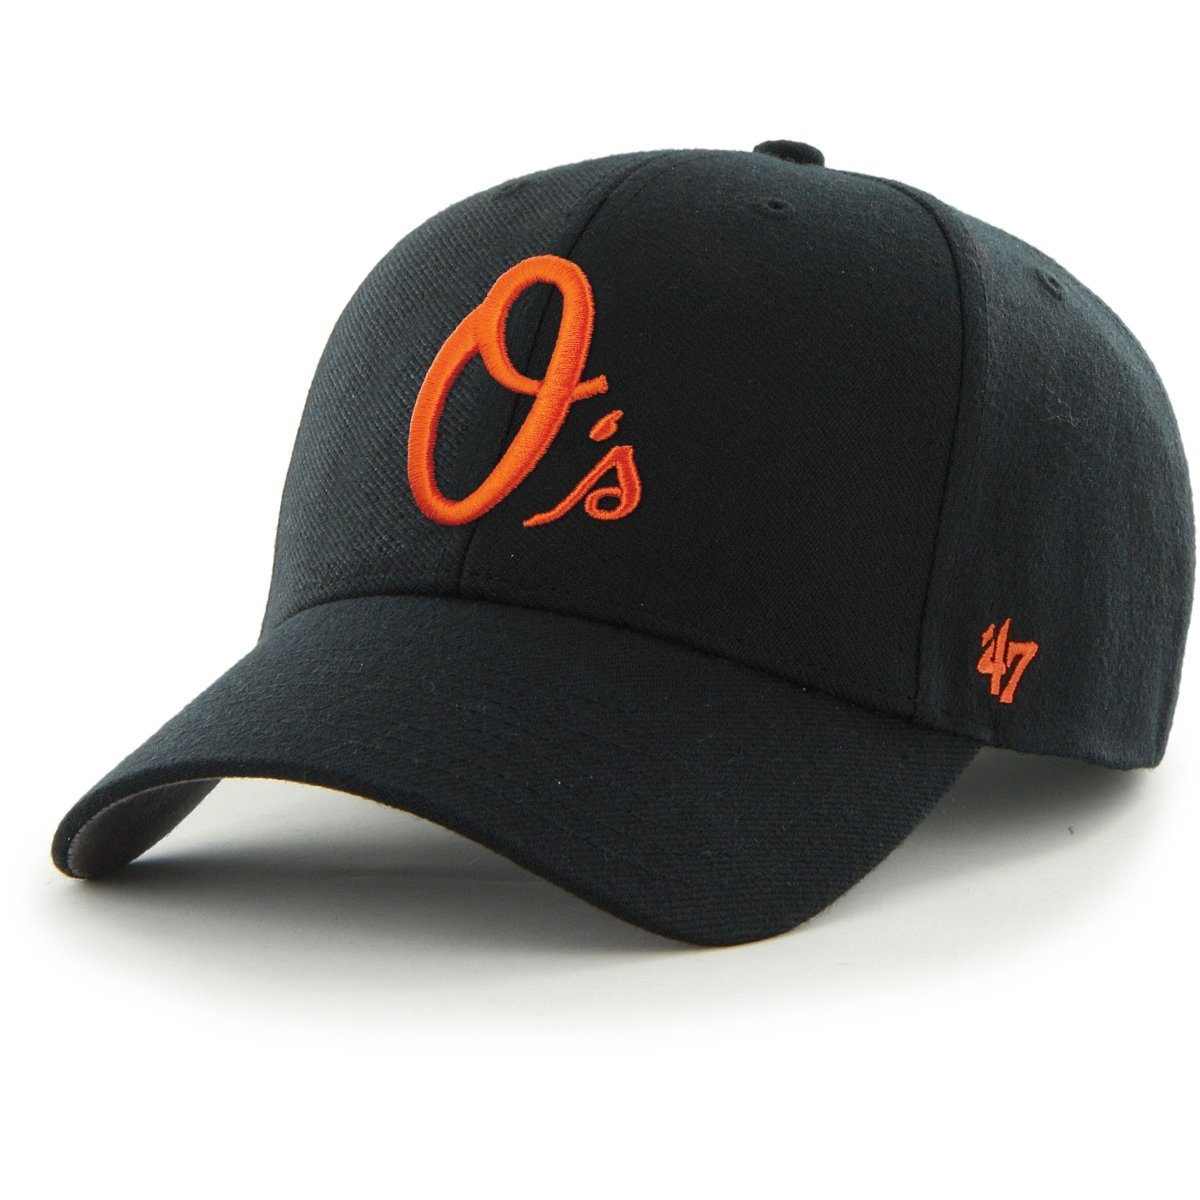 Cap '47 Relaxed MLB Baltimore Trucker Fit Brand Orioles